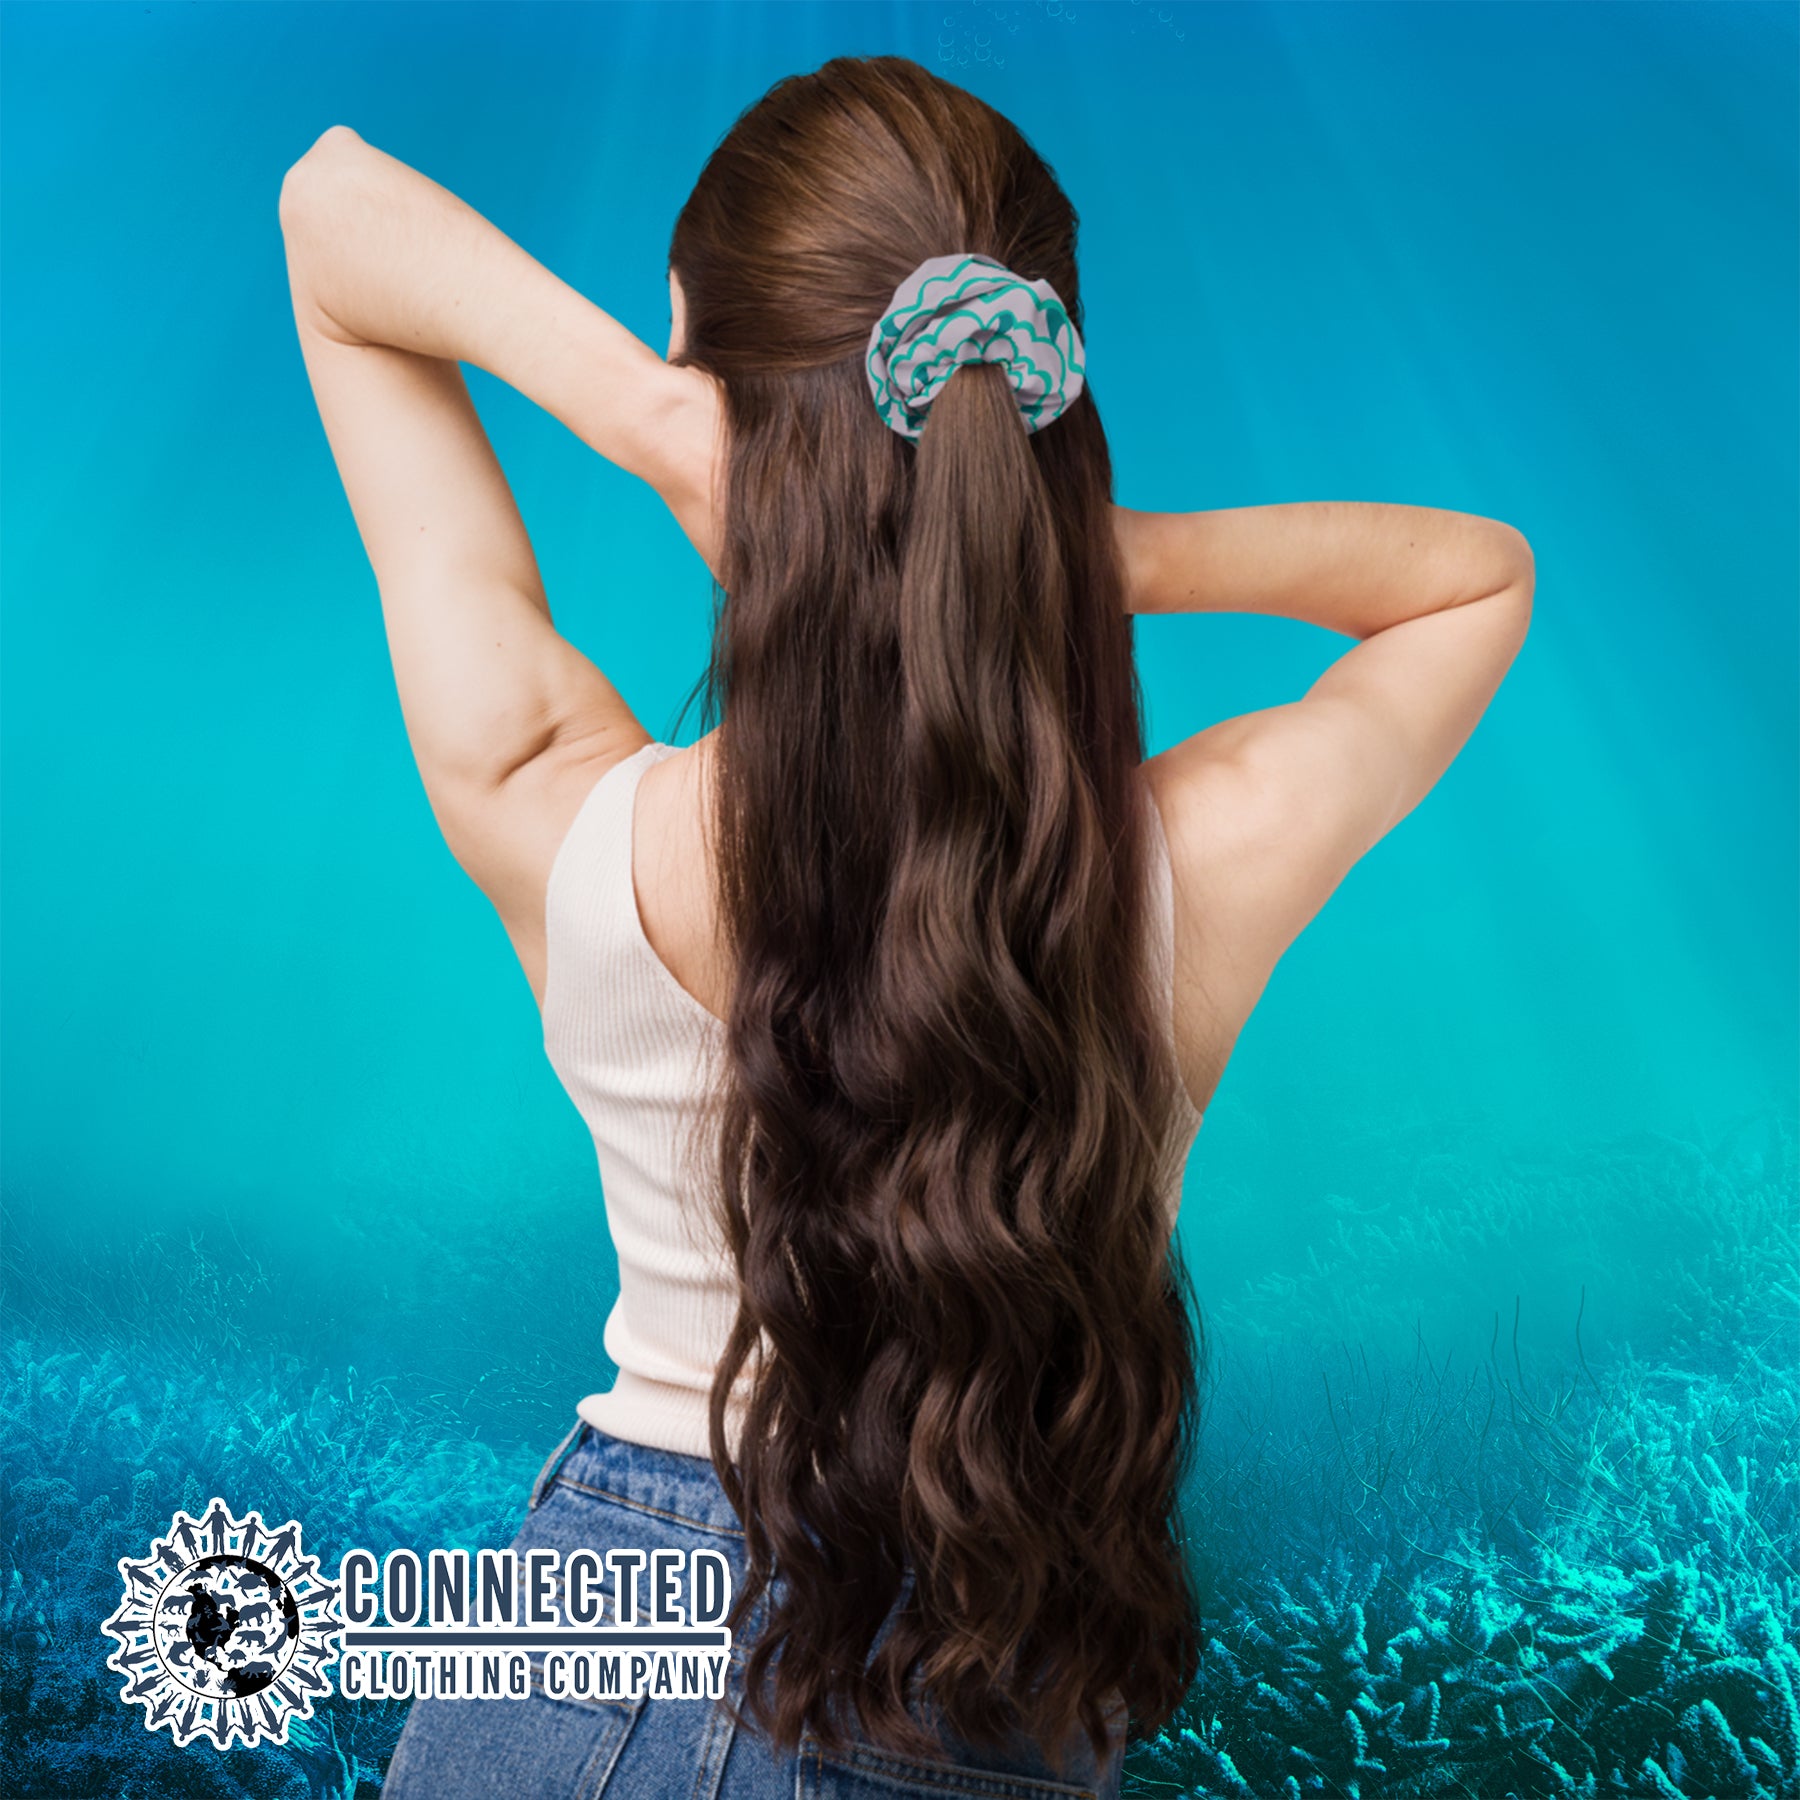 Model Wearing Shark Fin Scrunchie in Green Color - Connected Clothing Company - Ethical & Sustainable Apparel - 10% donated to save the sharks